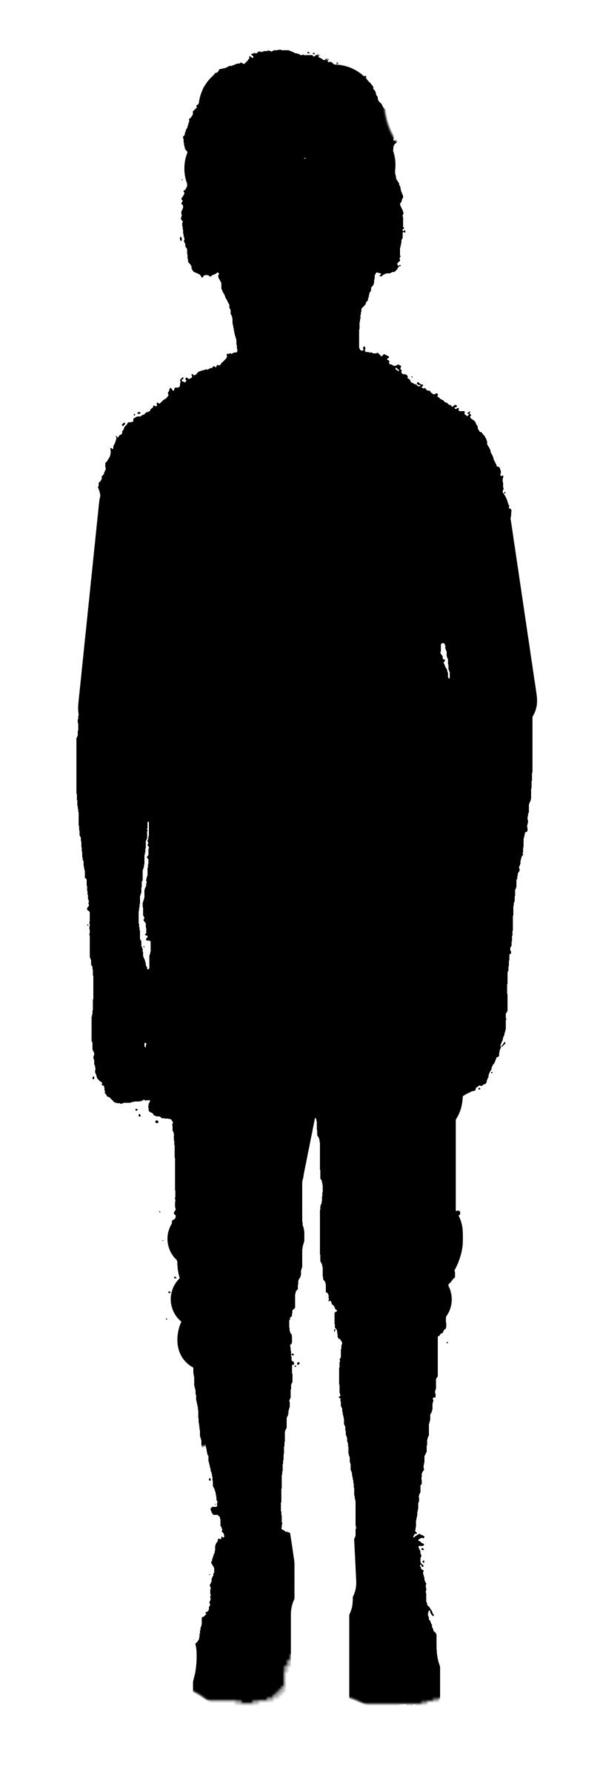 Silhouette of a five year old boy facing forward.